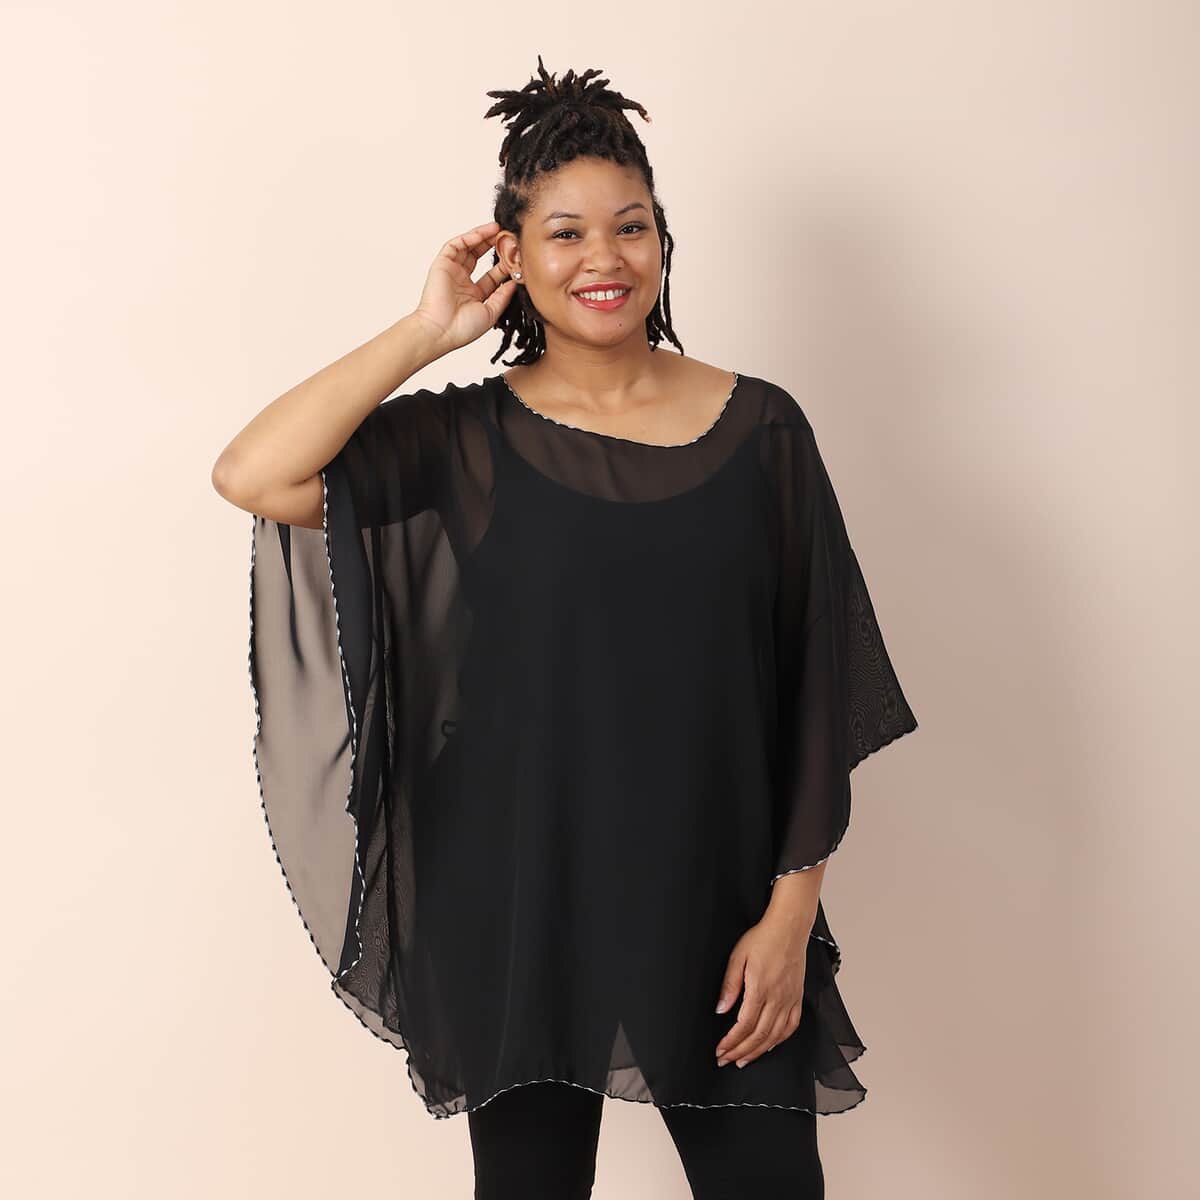 JOVIE Black Chiffon Kaftan with Contrast Hem and Neckline | Kaftan Top | Women's Top | Going Out Tops | Ladies Top | Blouses for Women image number 2